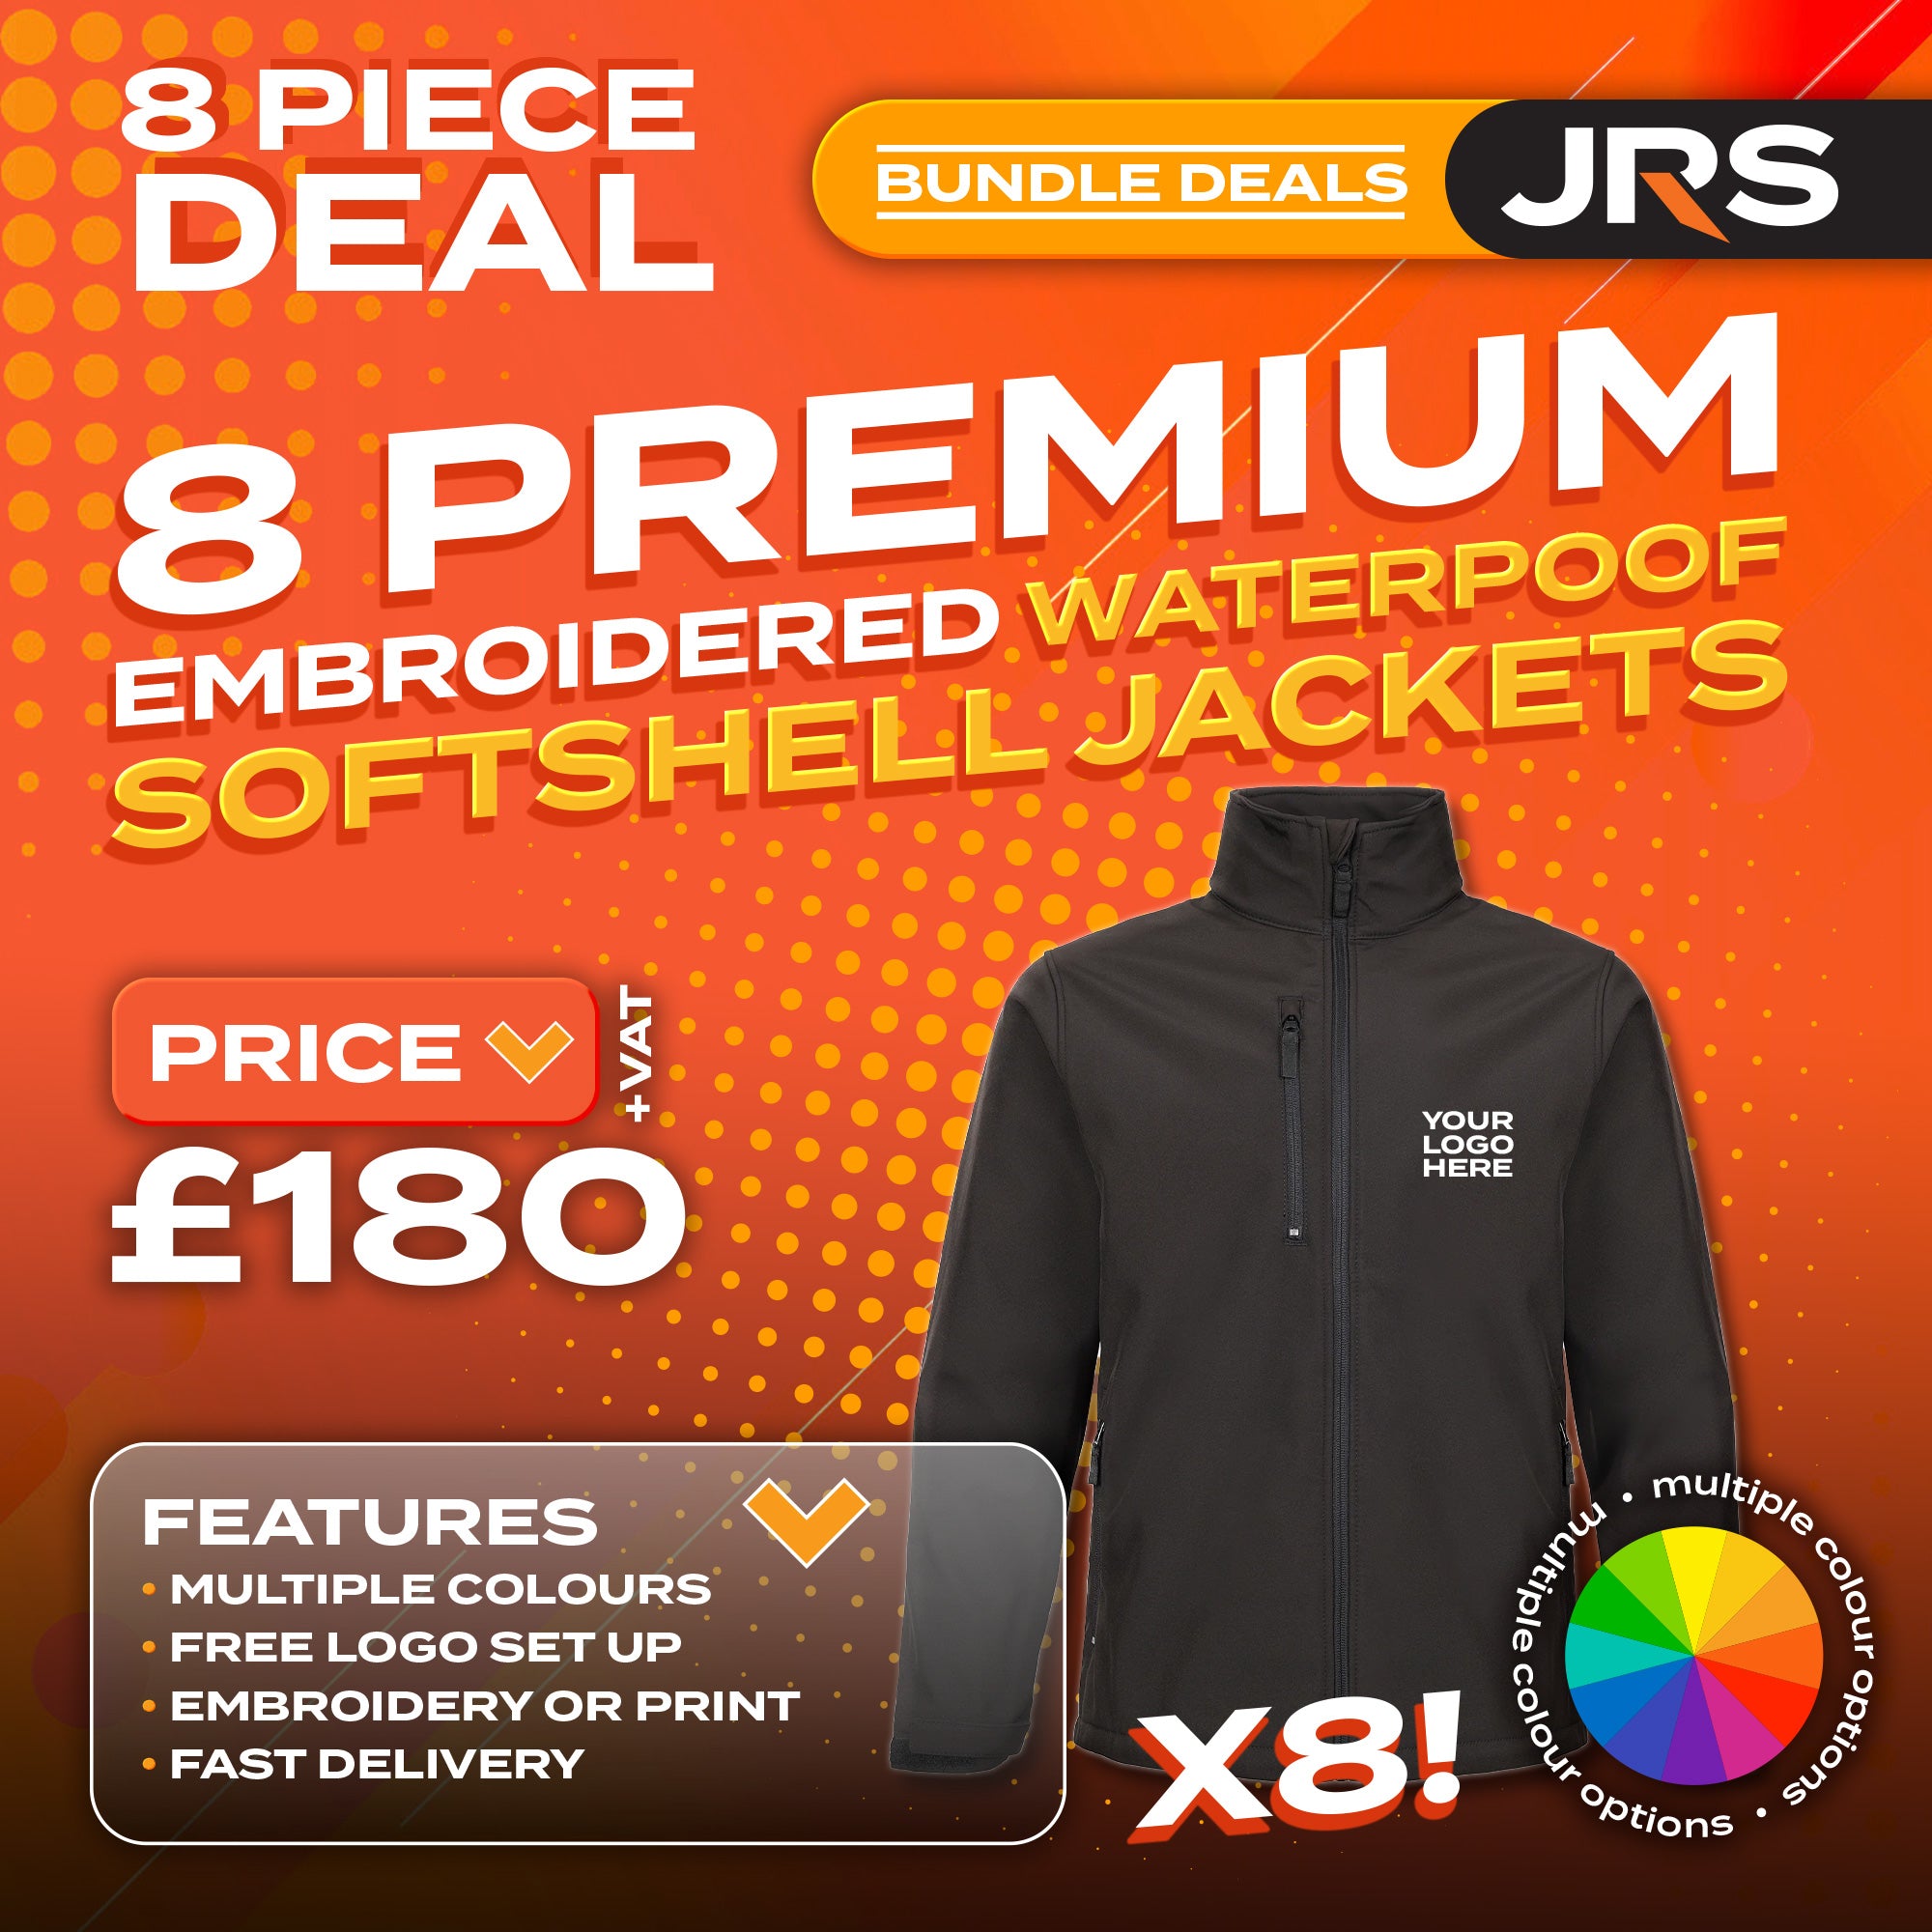 8x Embroidered Waterpoof Softshell Jackets Bundle Deal